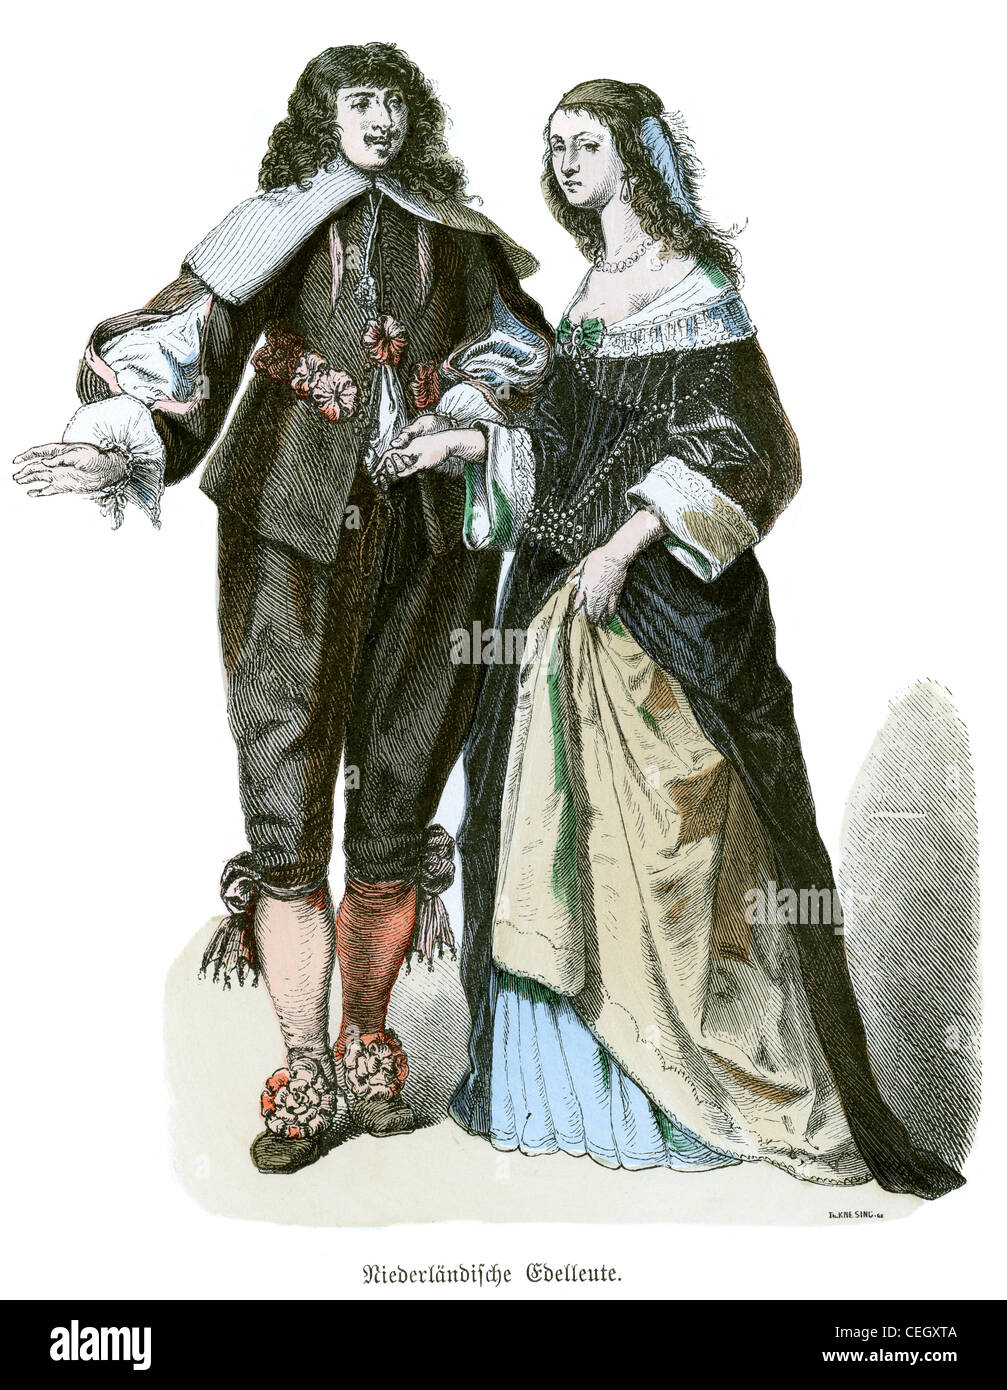 A dutch noble man and woman in the fashion of the 17th century Stock Photo